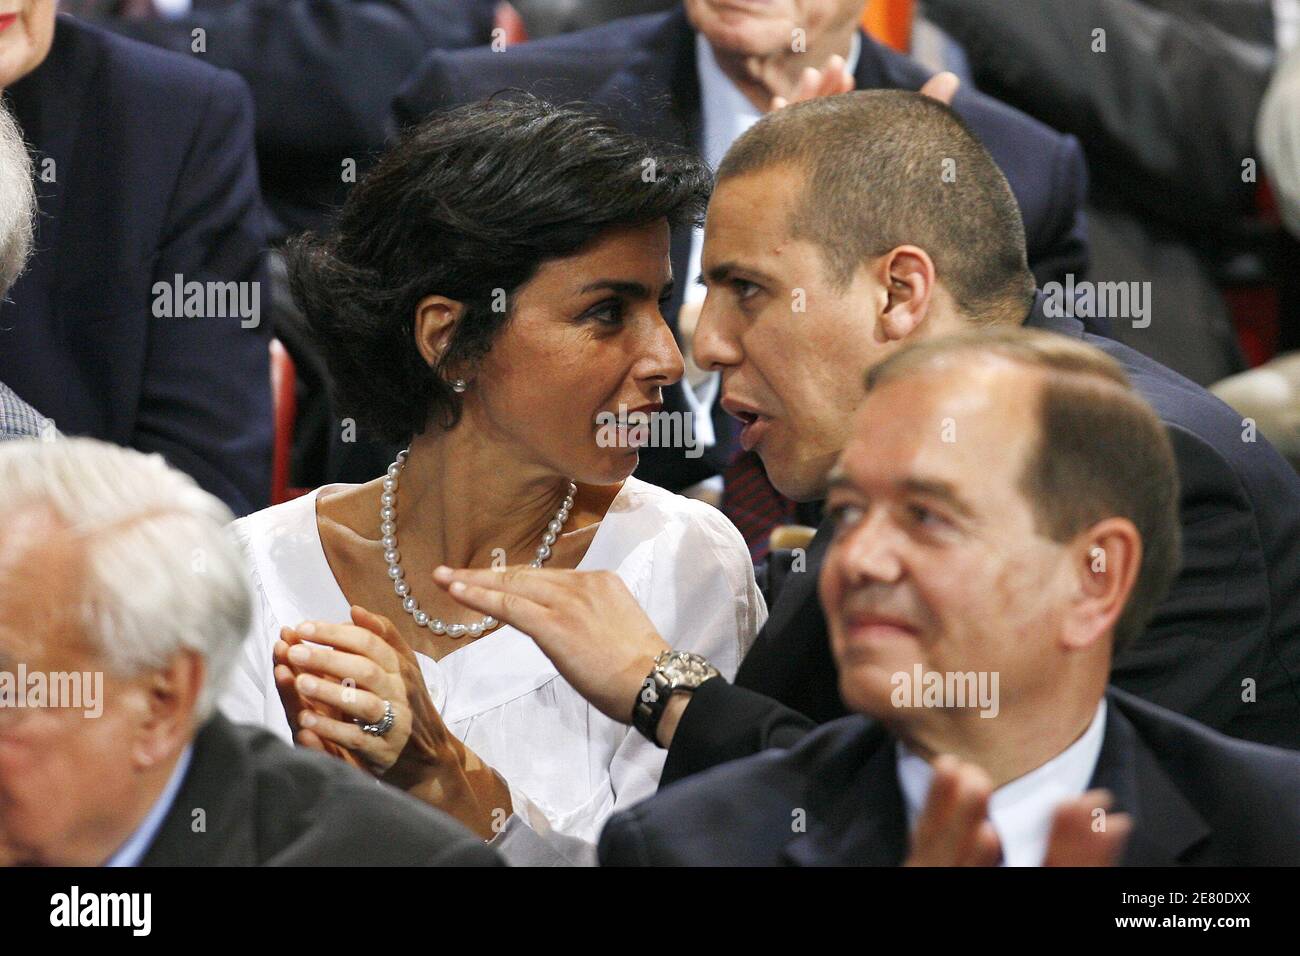 'Rachida Dati and singer Faudel are seen listening to Presidential frontrunner Nicolas Sarkozy adressing tens of thousands of supporters at Paris Bercy concert hall in Paris, France, April 29, 2007. Sarkozy went on the offensive Sunday, charging that he had been unjustly depicted as authoritarian as the battle for the Elysee entered its final week. The rightwinger said he had suffered ''personal attacks'' during the campaign that had targeted his ''honour, sincerity, personality and character.'' Photo By Bisson-Taamallah-Orban/ABACAPRESS.COM' Stock Photo